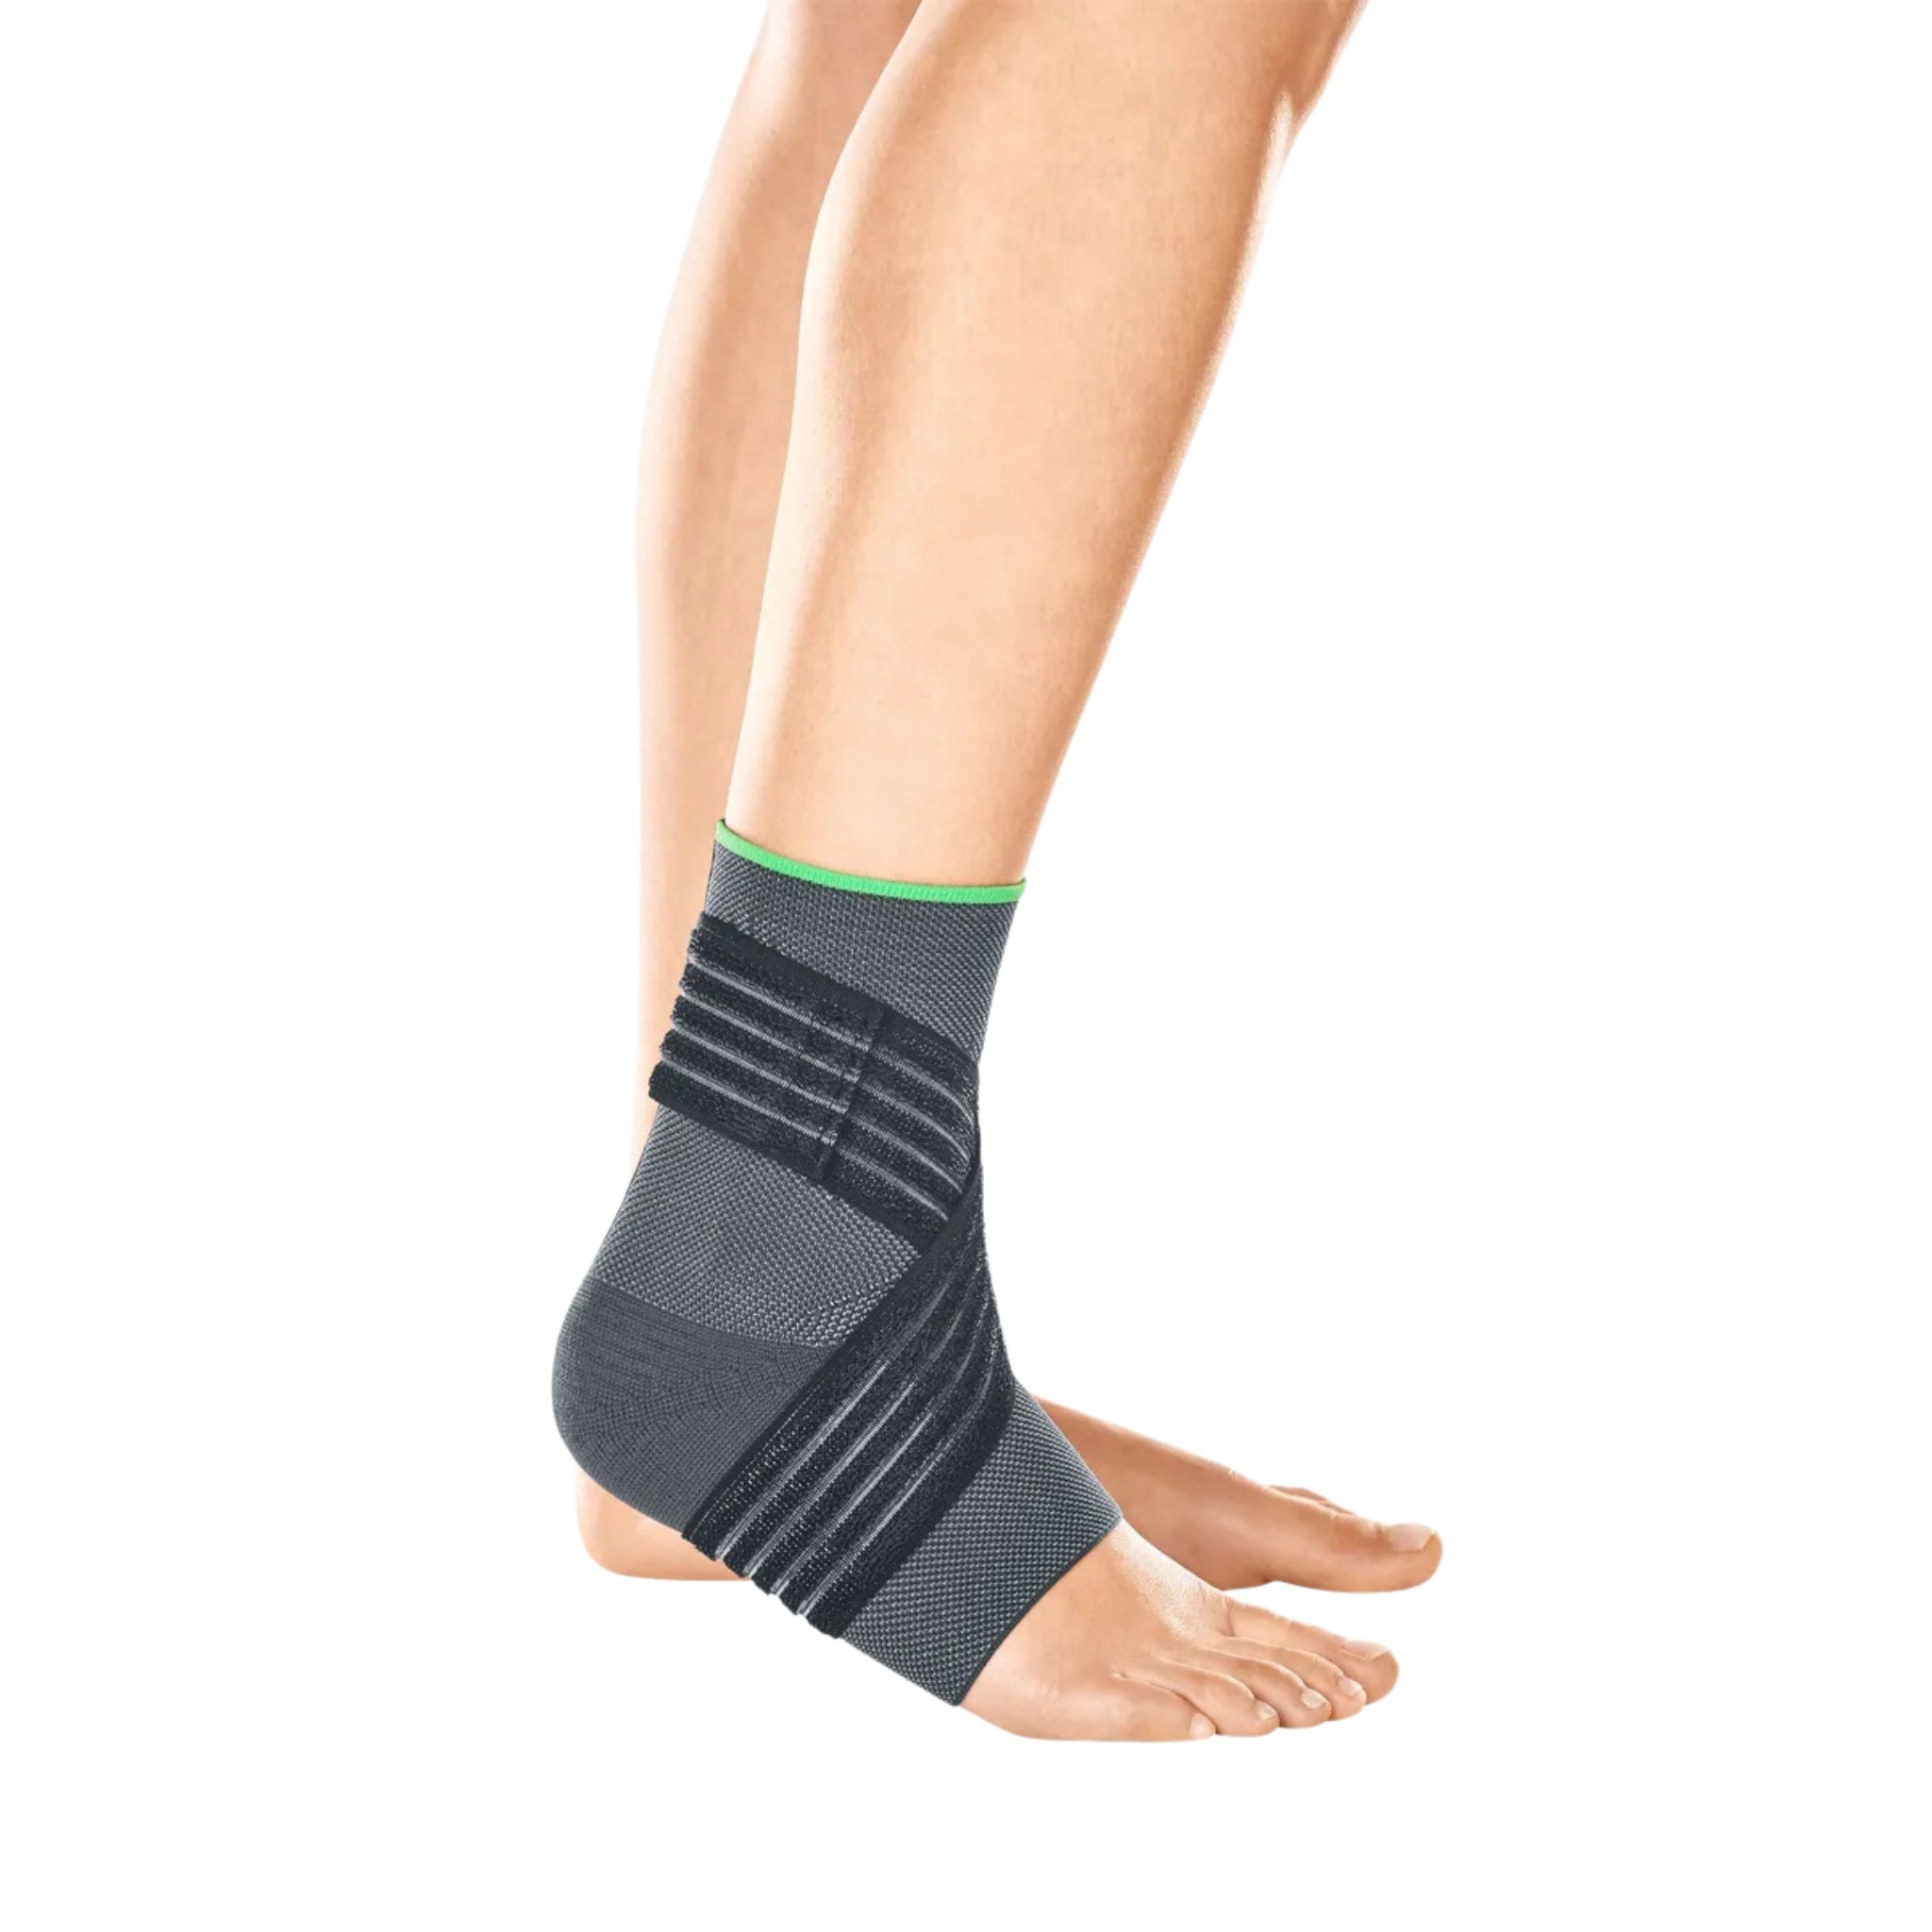 Elastic Ankle Support | protect.Leva Strap